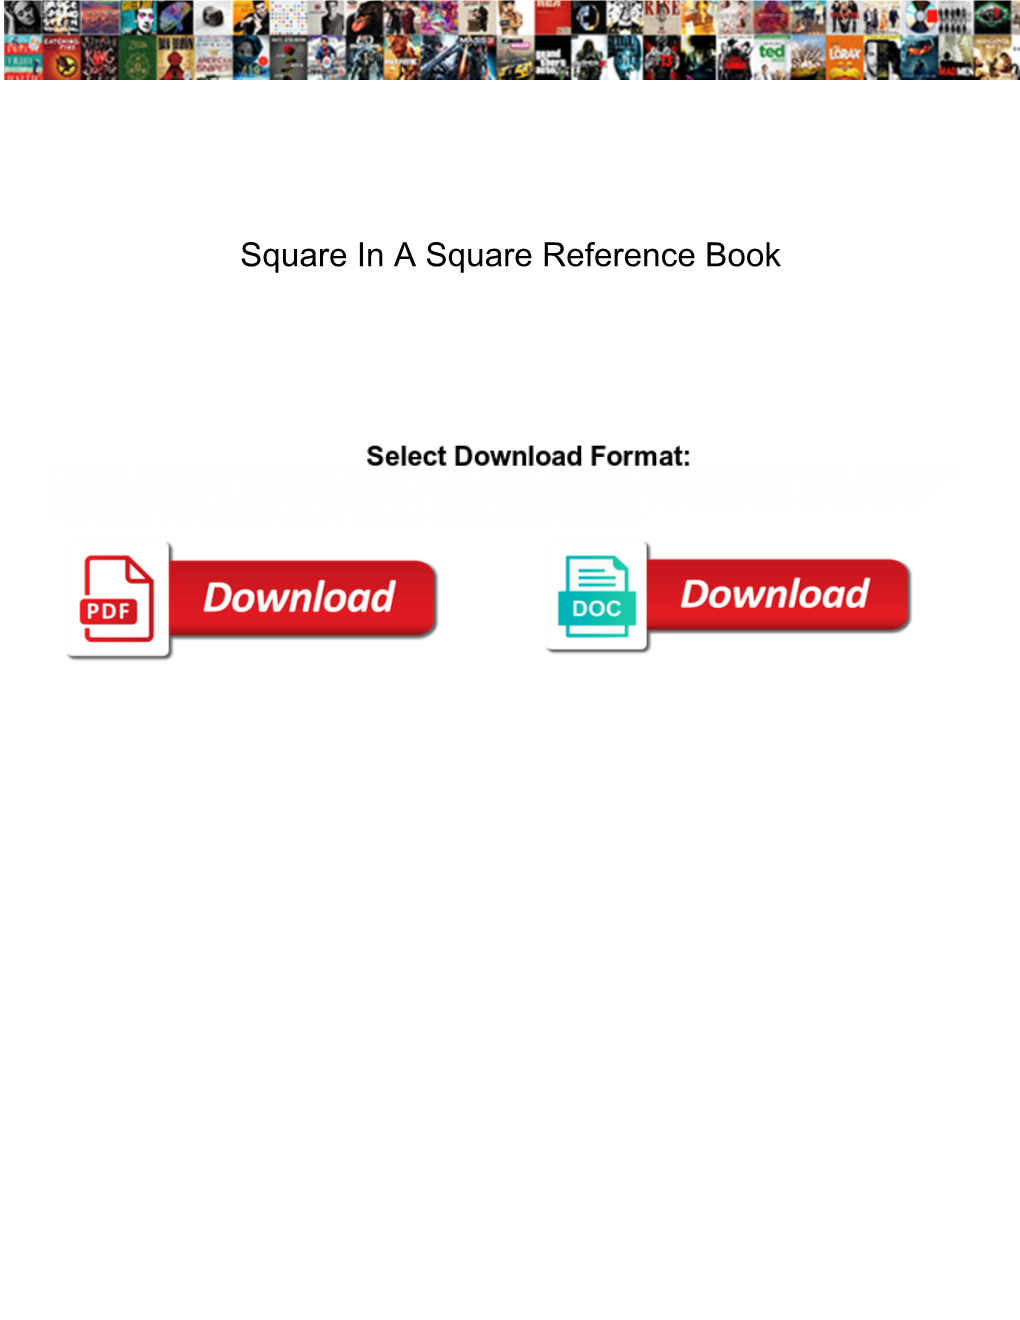 Square in a Square Reference Book